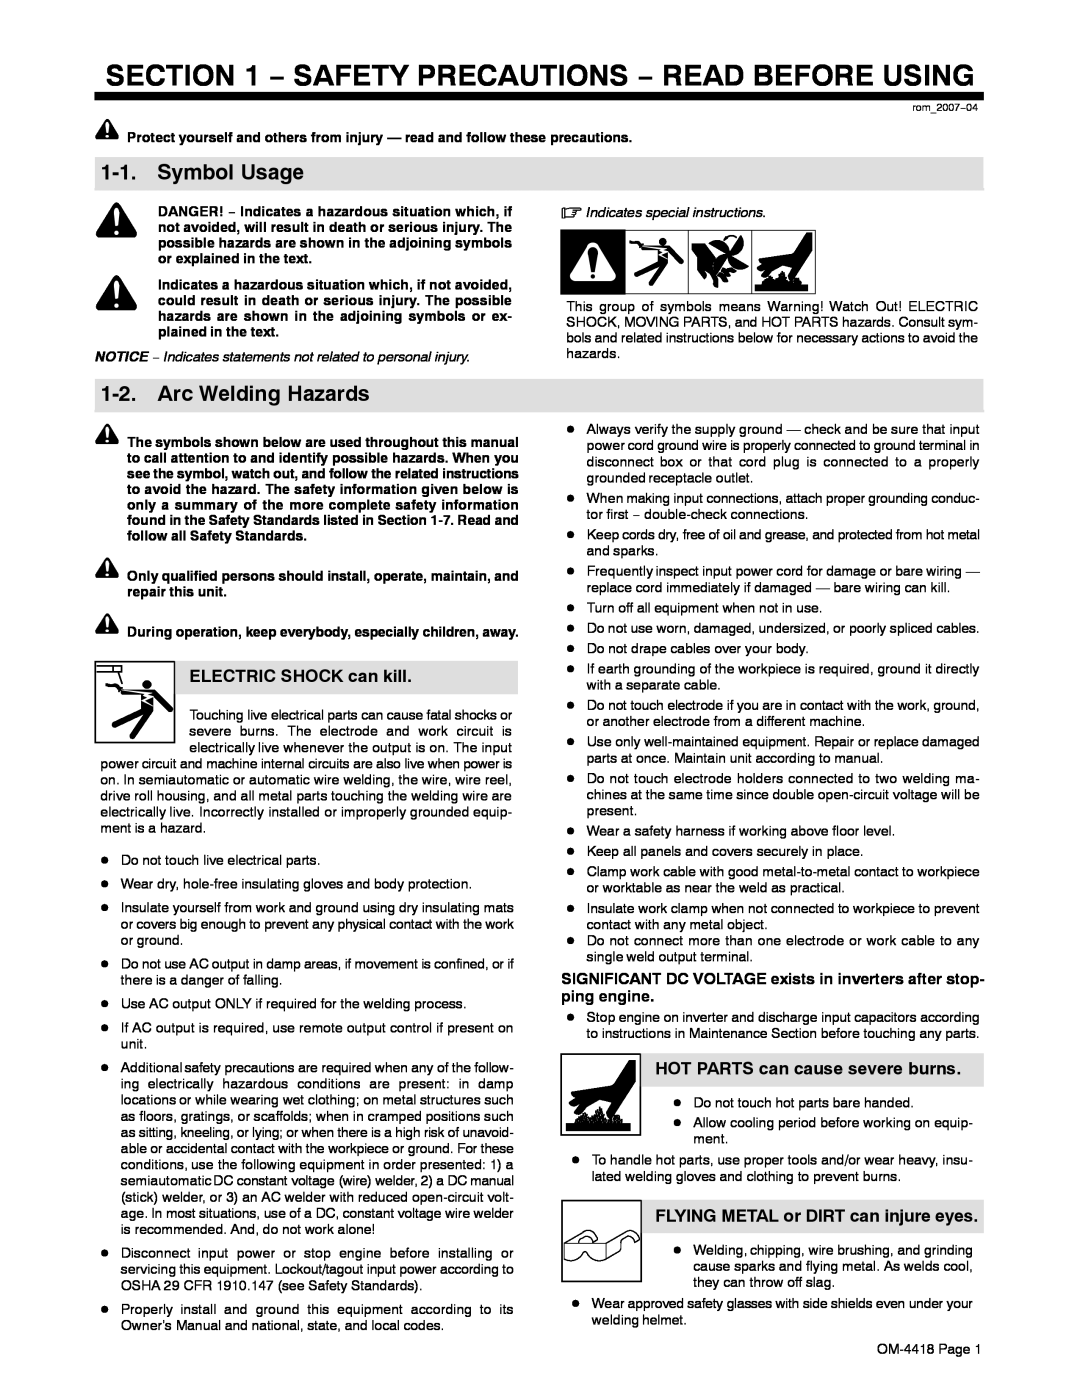 Hobart Welding Products 4500 manual Symbol Usage, Arc Welding Hazards, Safety Precautions − Read Before Using 